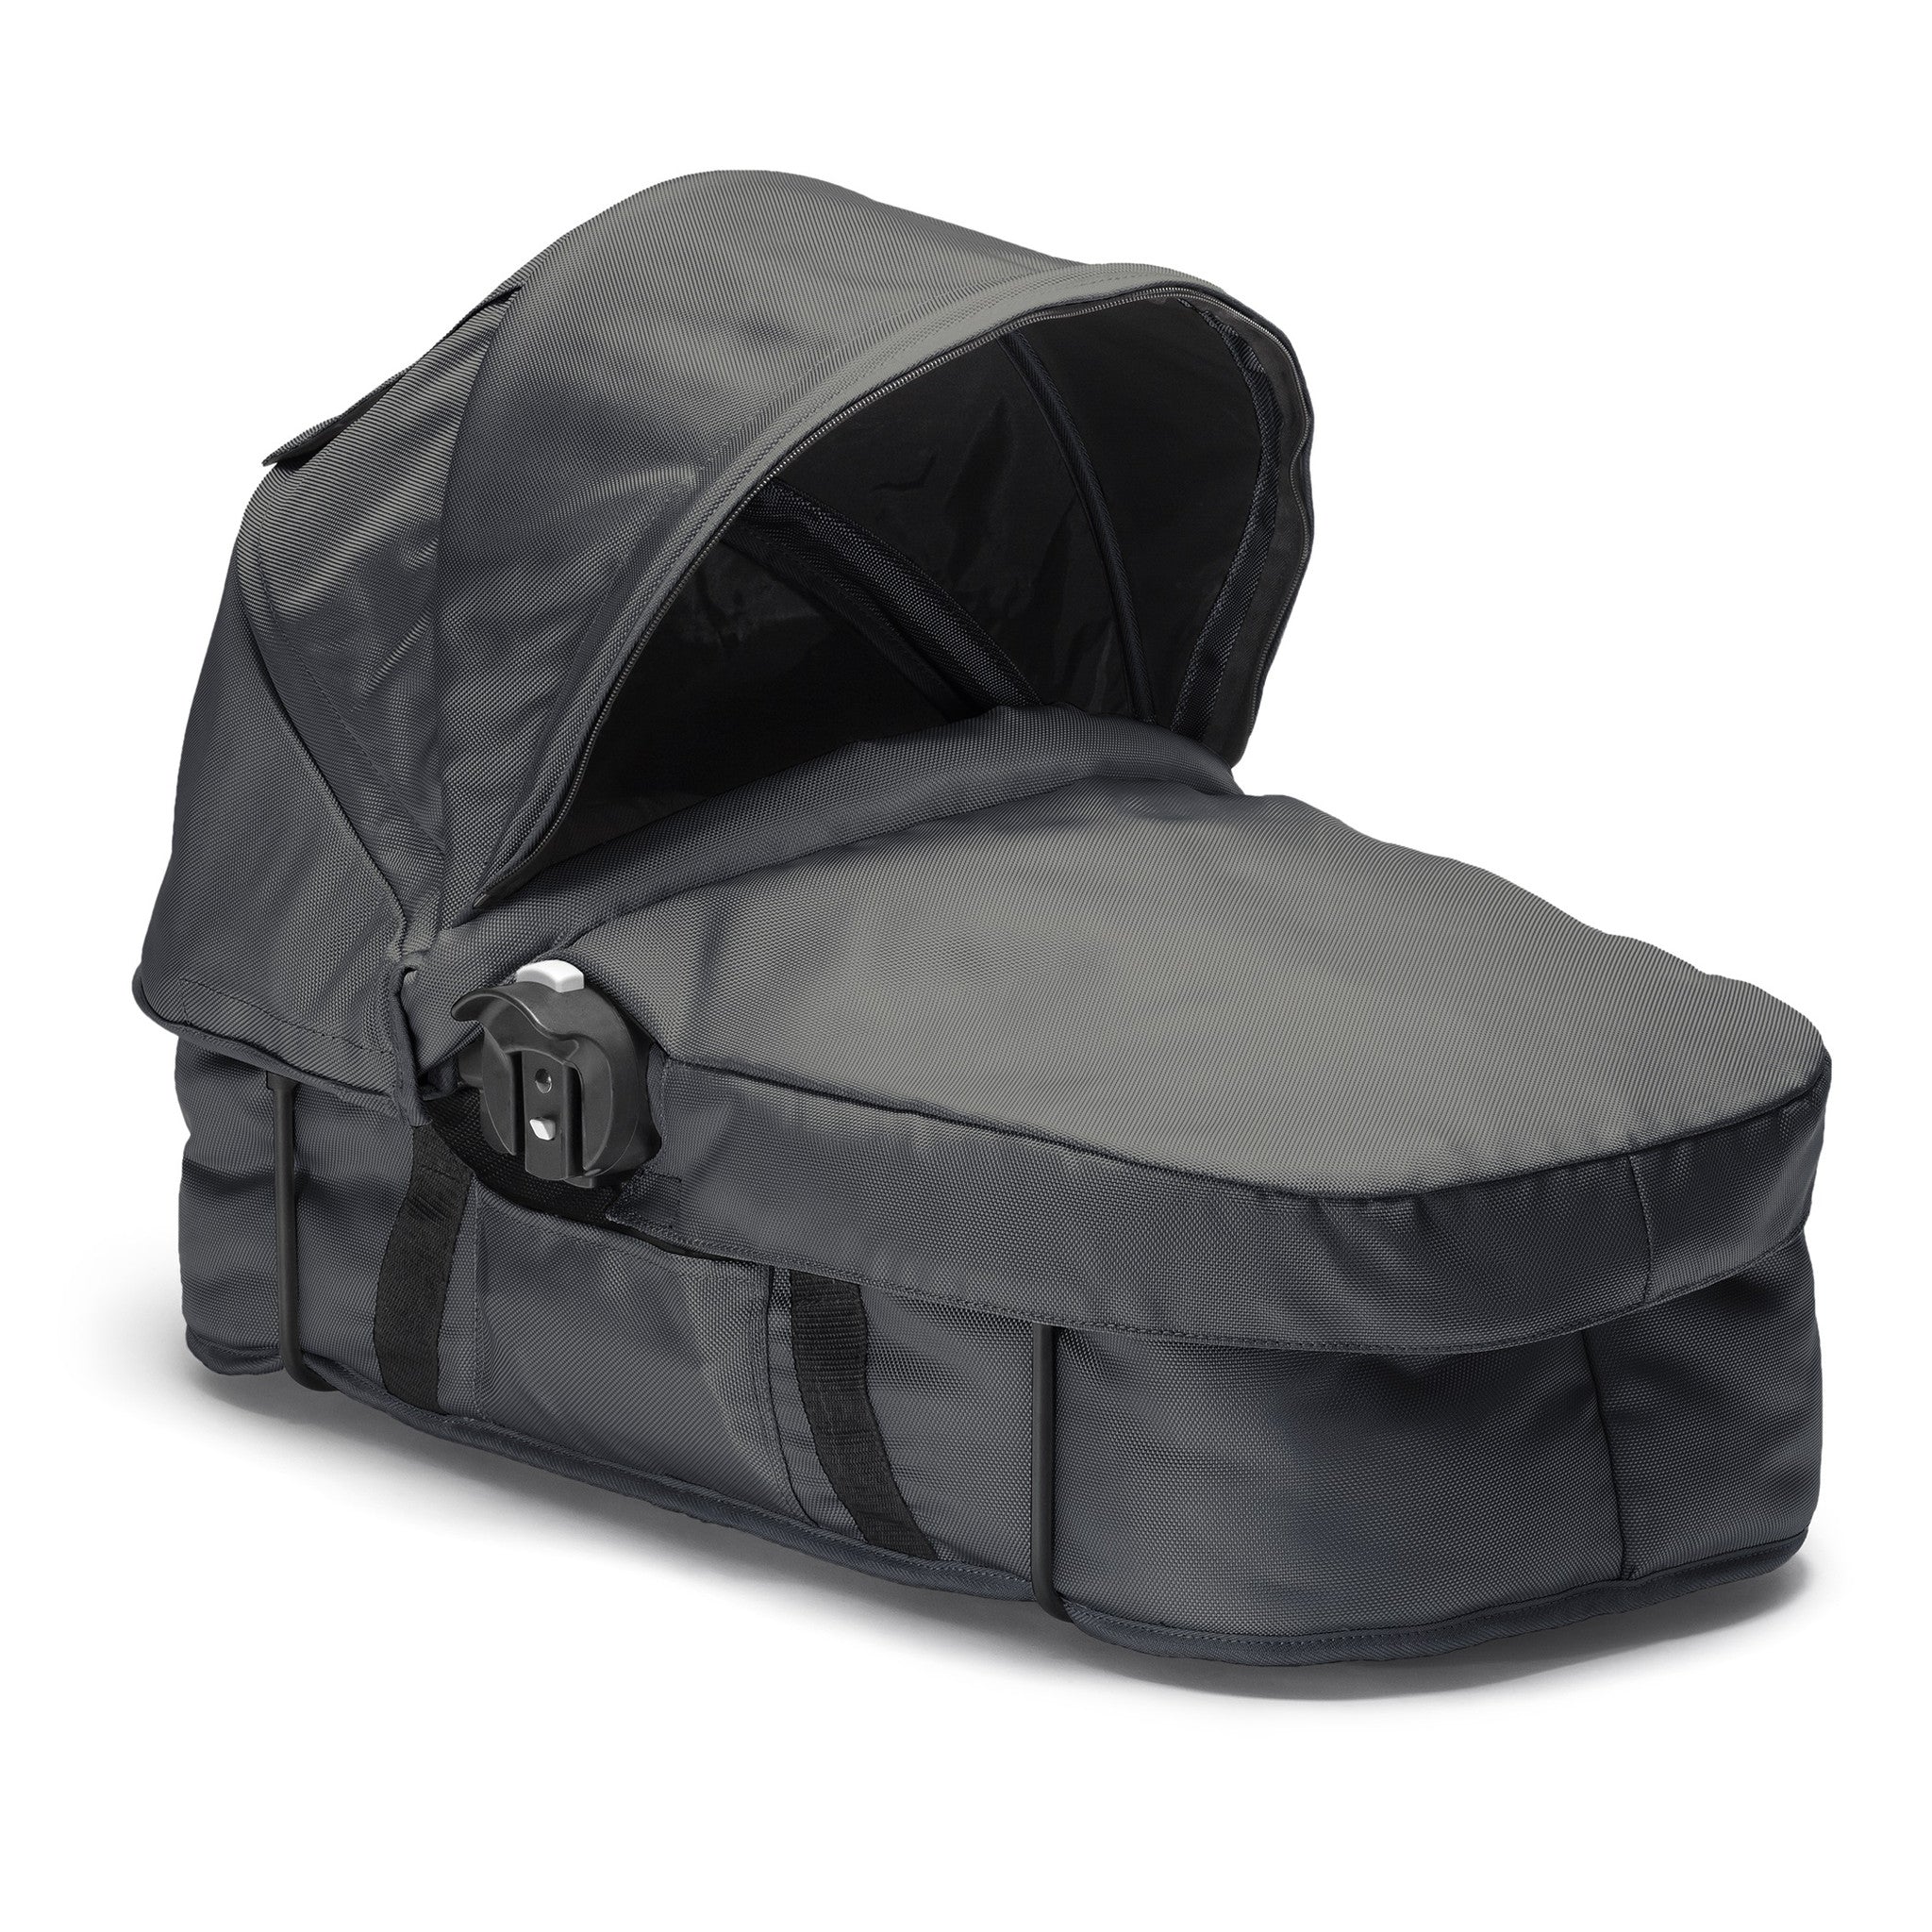 baby jogger compact bassinet